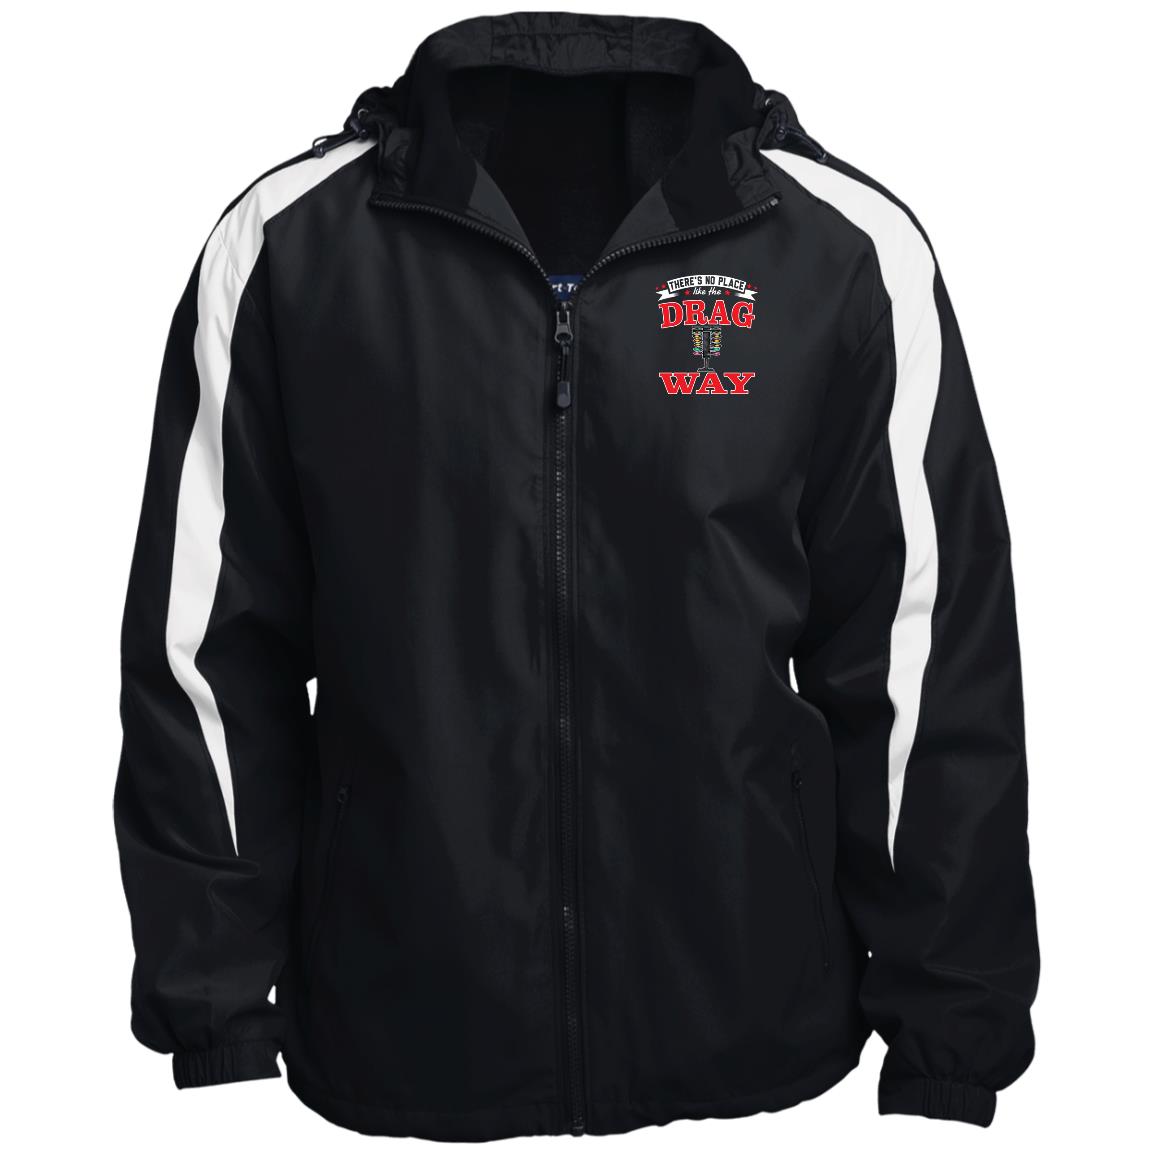 There's No Place Like The Dragway Fleece Lined Colorblock Hooded Jacket